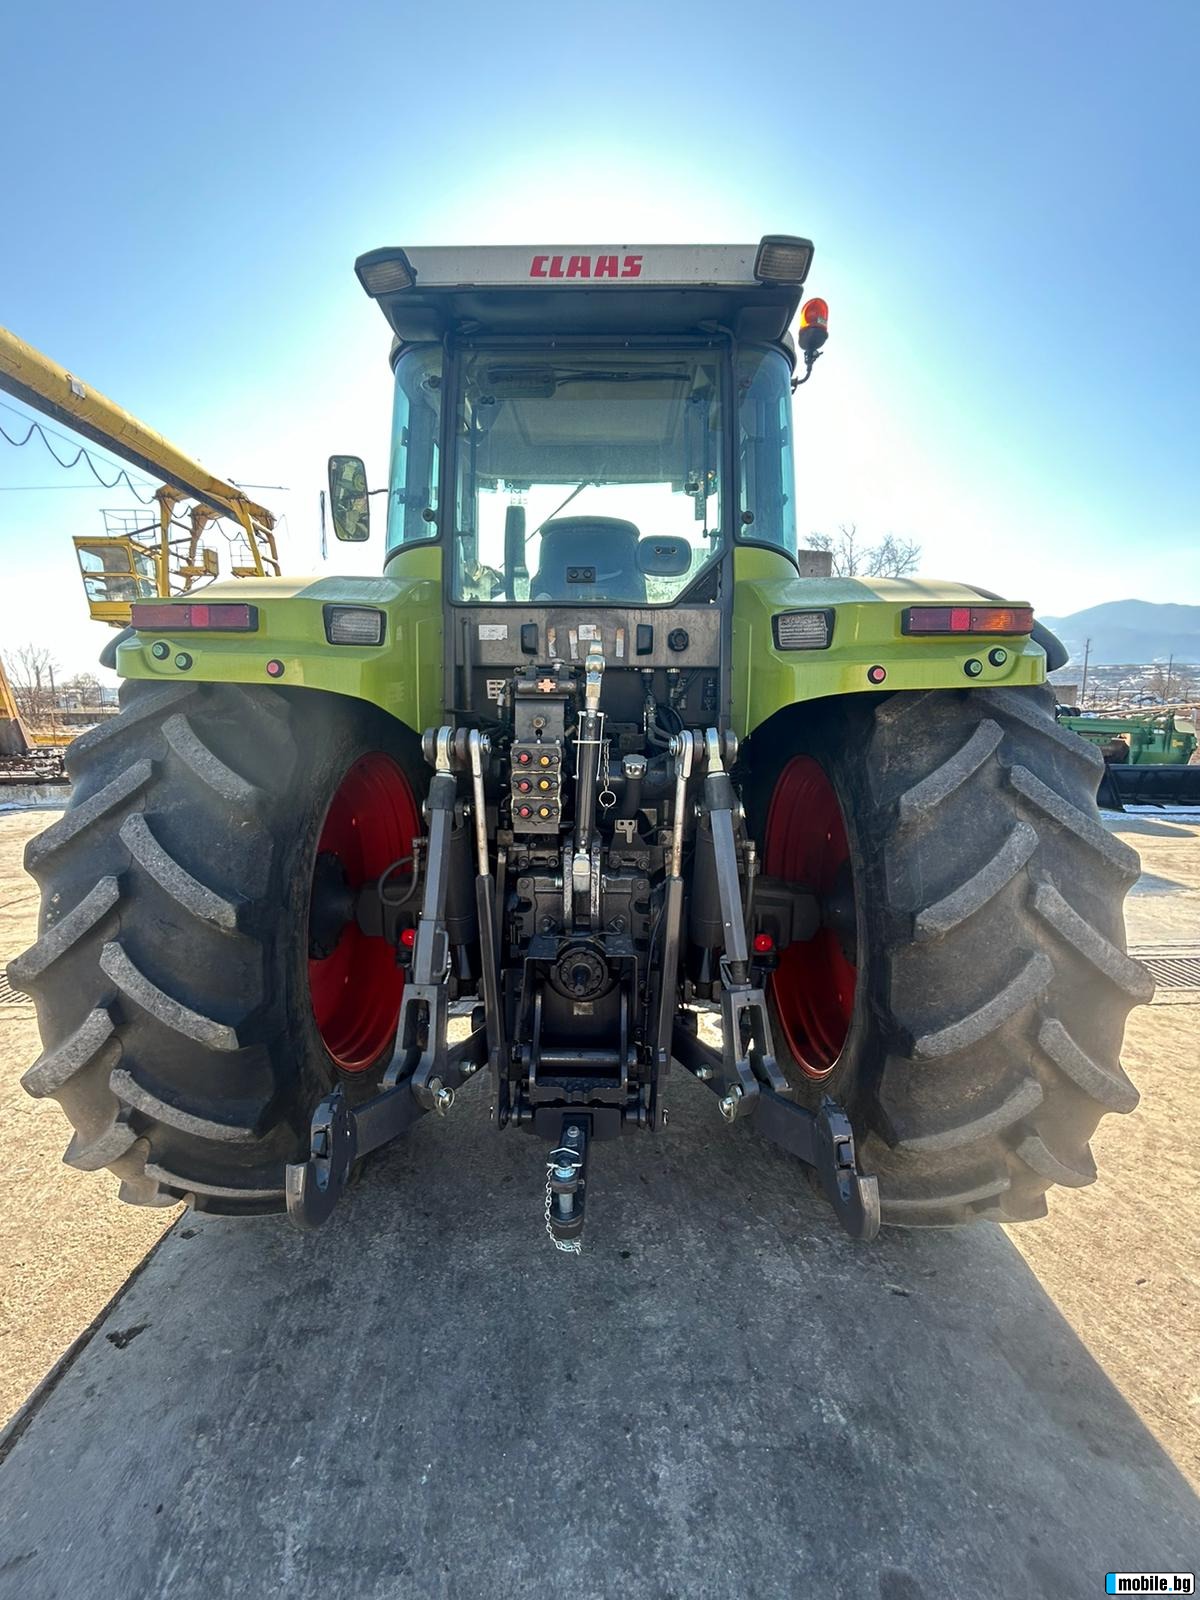  Claas Ares 836 RZ  | Mobile.bg   4